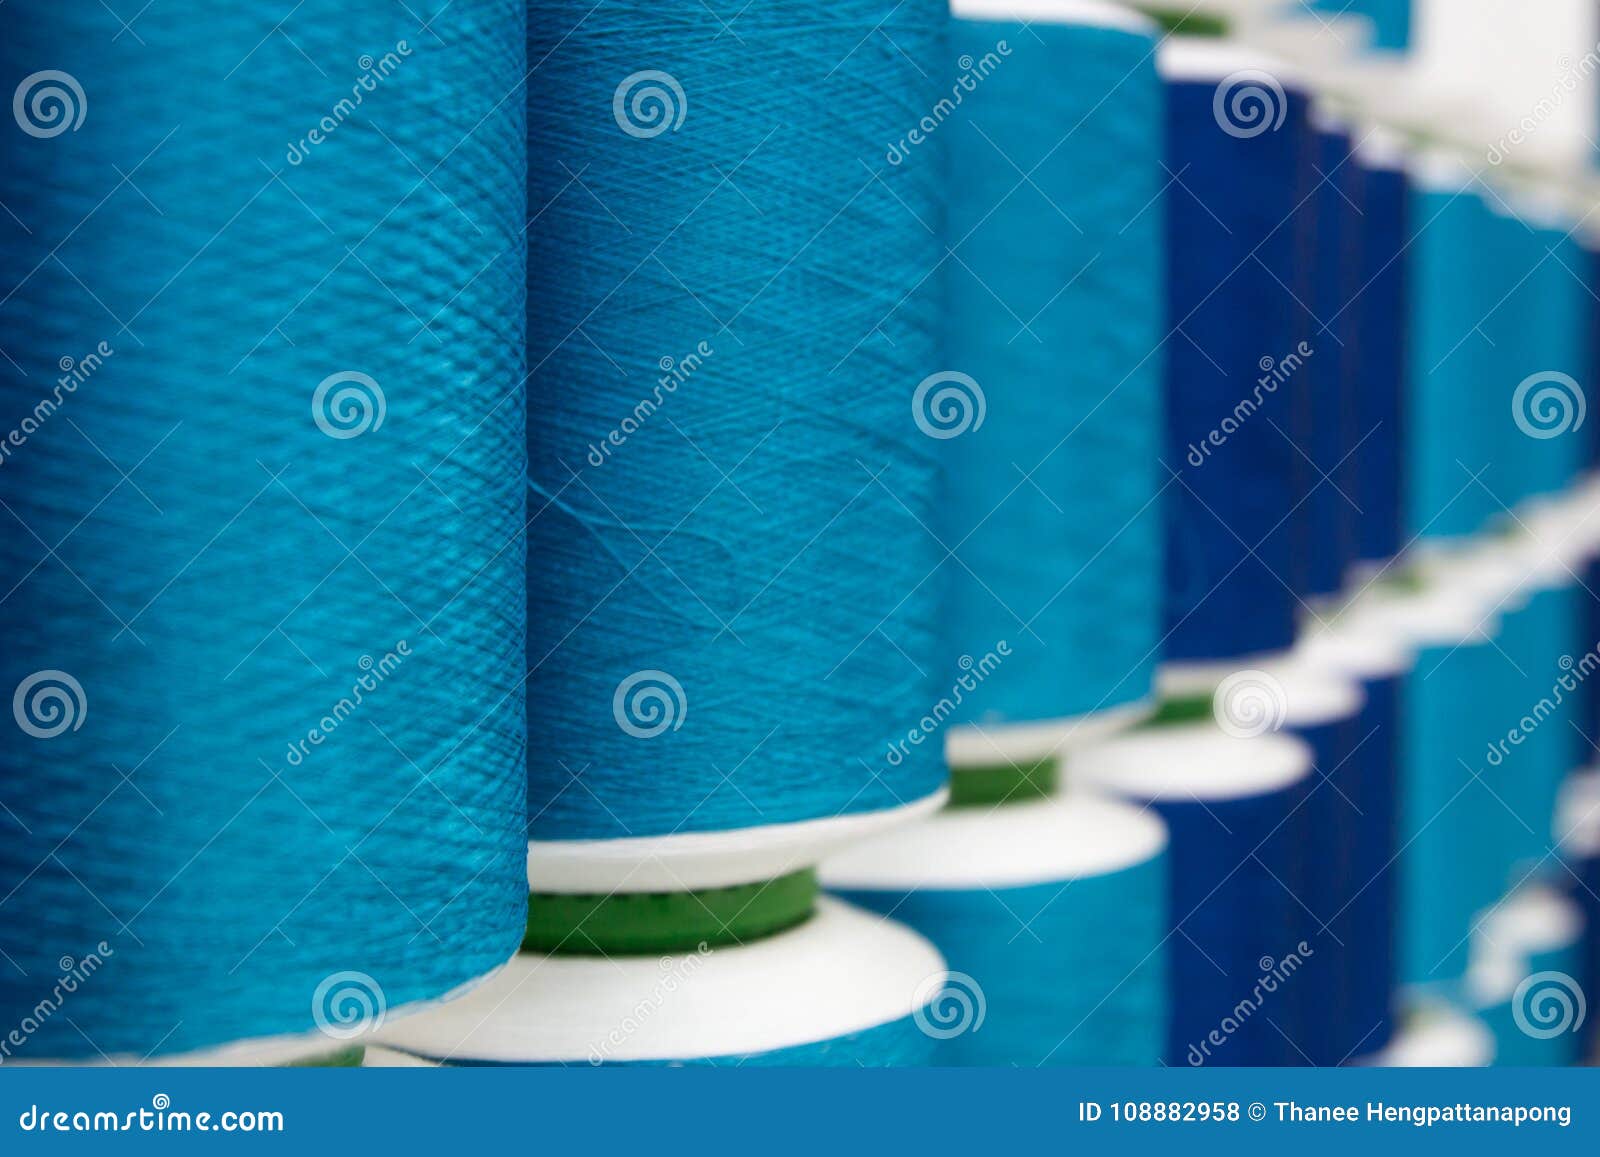 Closed Up of Vairous Blue Color Thread Reel Stock Photo - Image of